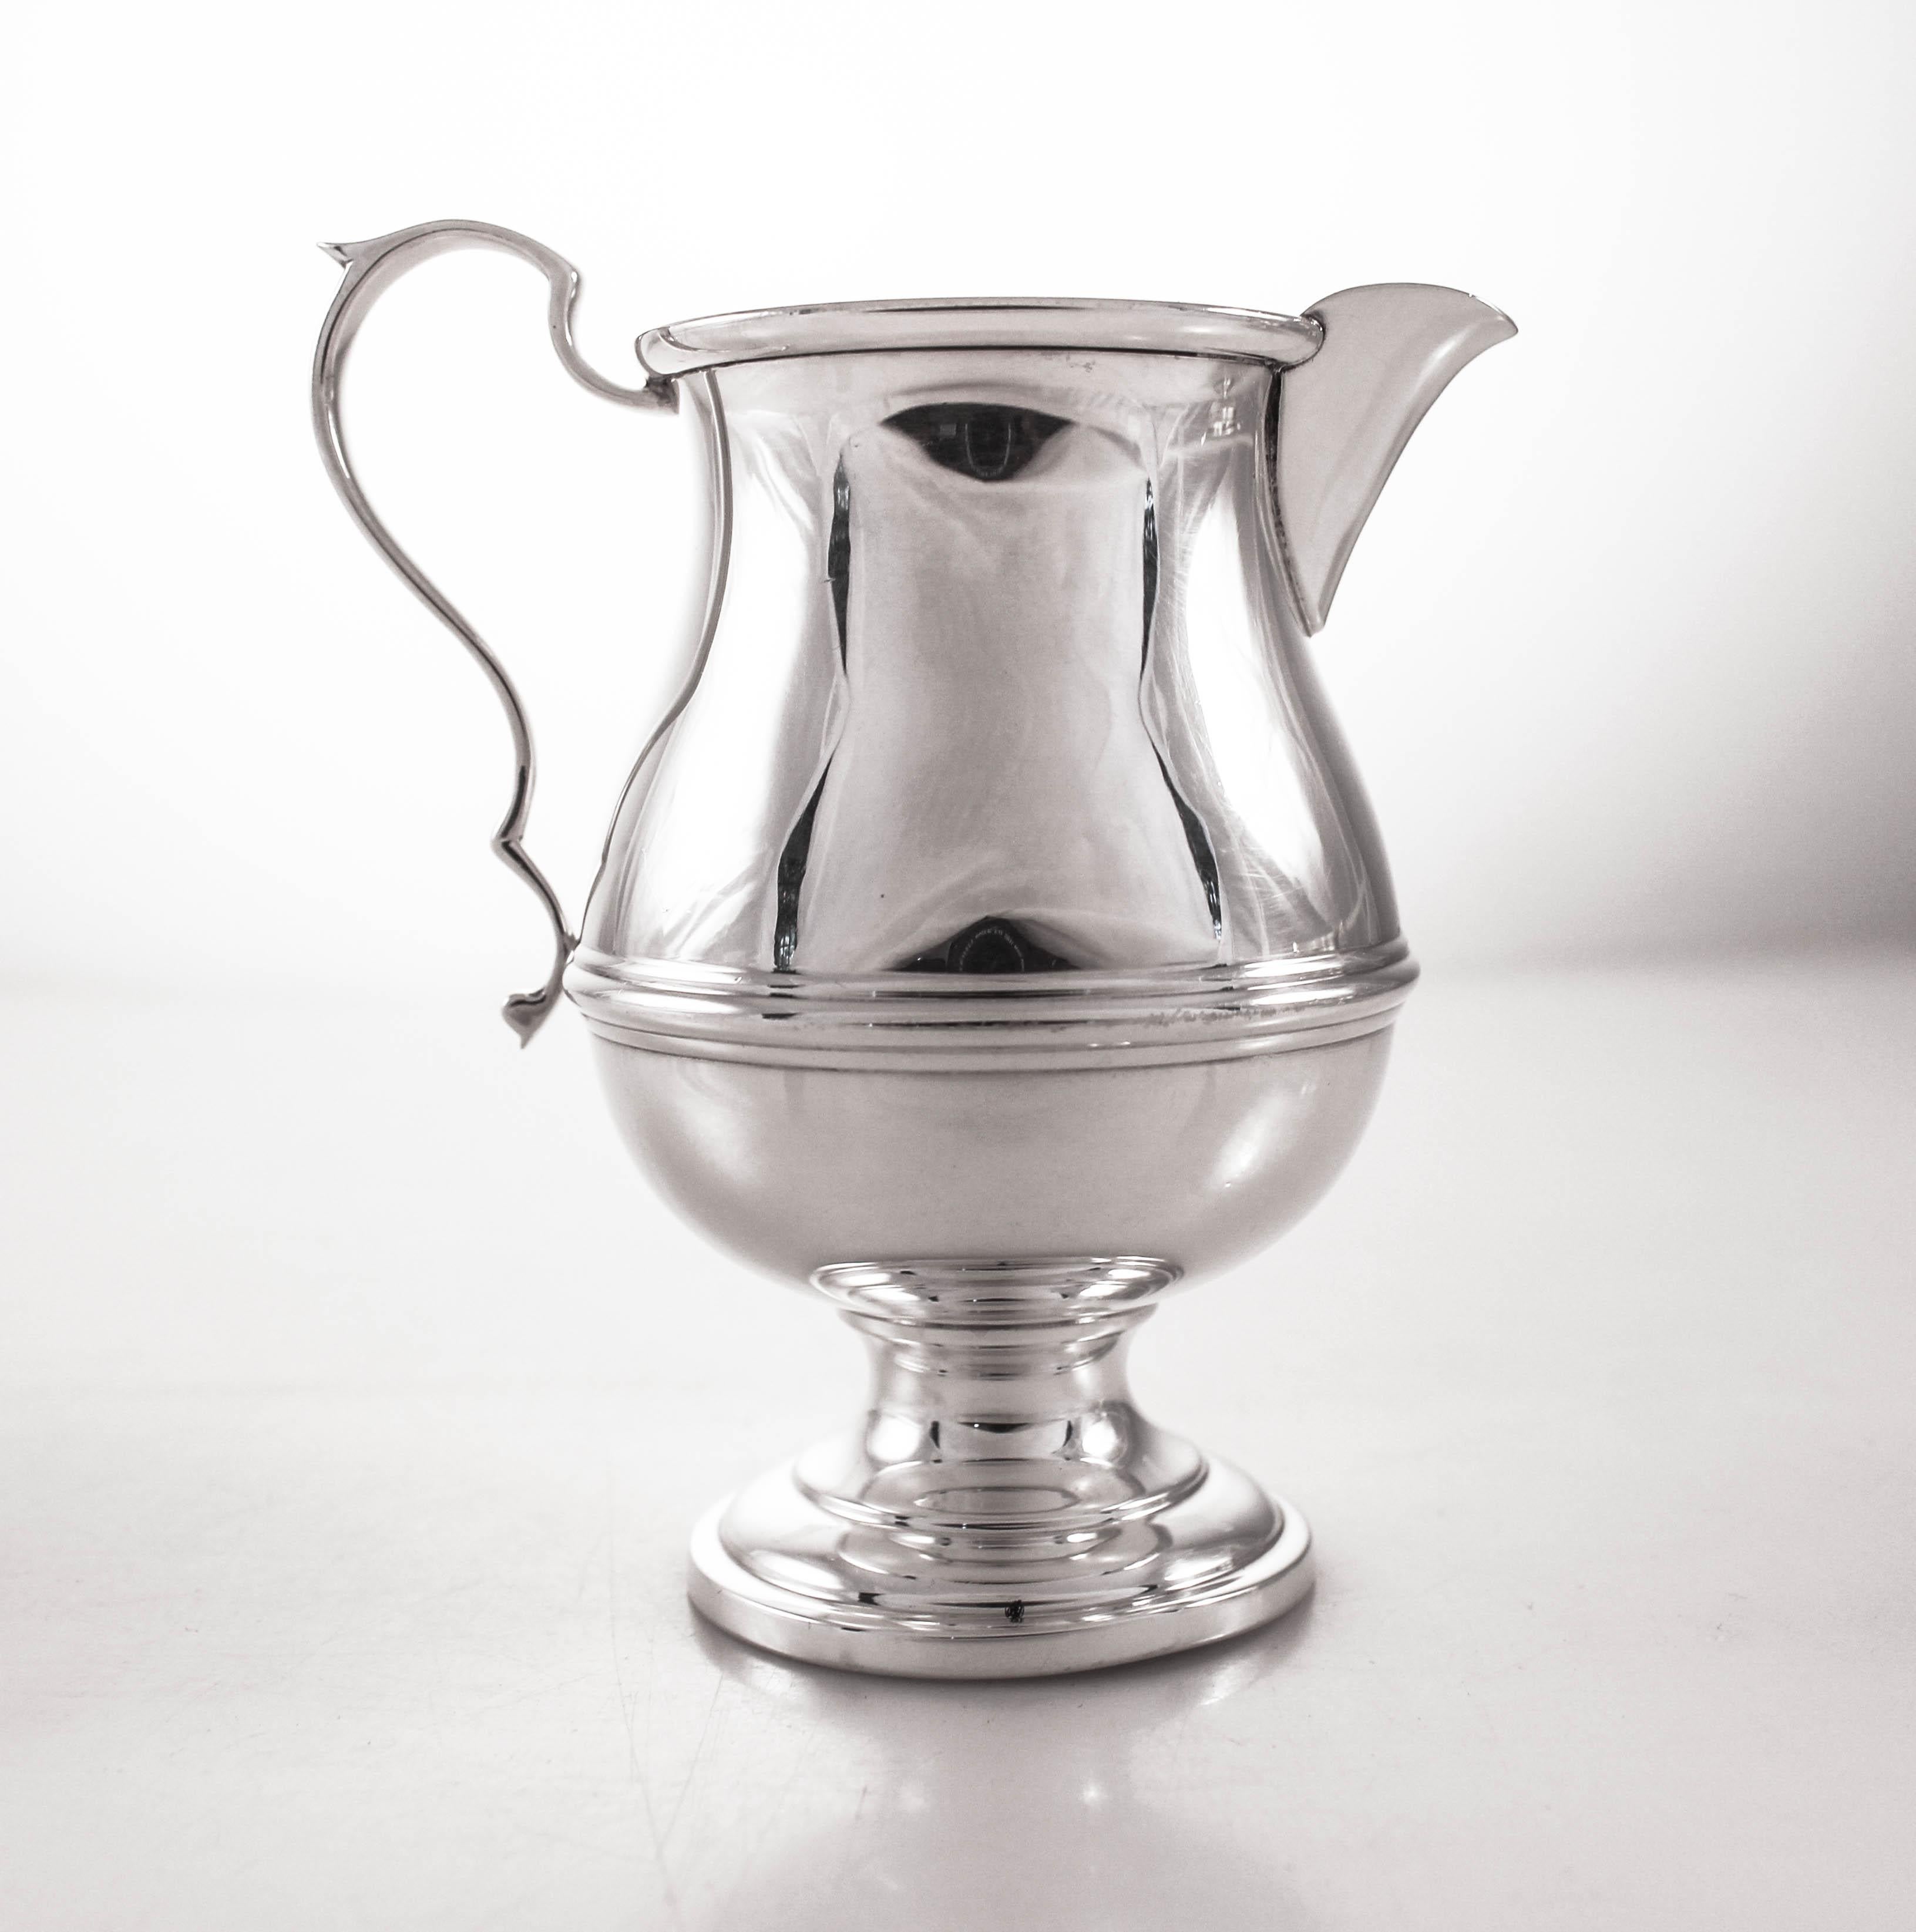 We are delighted to offer this sterling silver cream and sugar bowl set by Redlich & Co, NY. A classic design that works in any decor; just a ribbing design across the waist. Beautiful and practical this set can be used day-to-day or when hosting